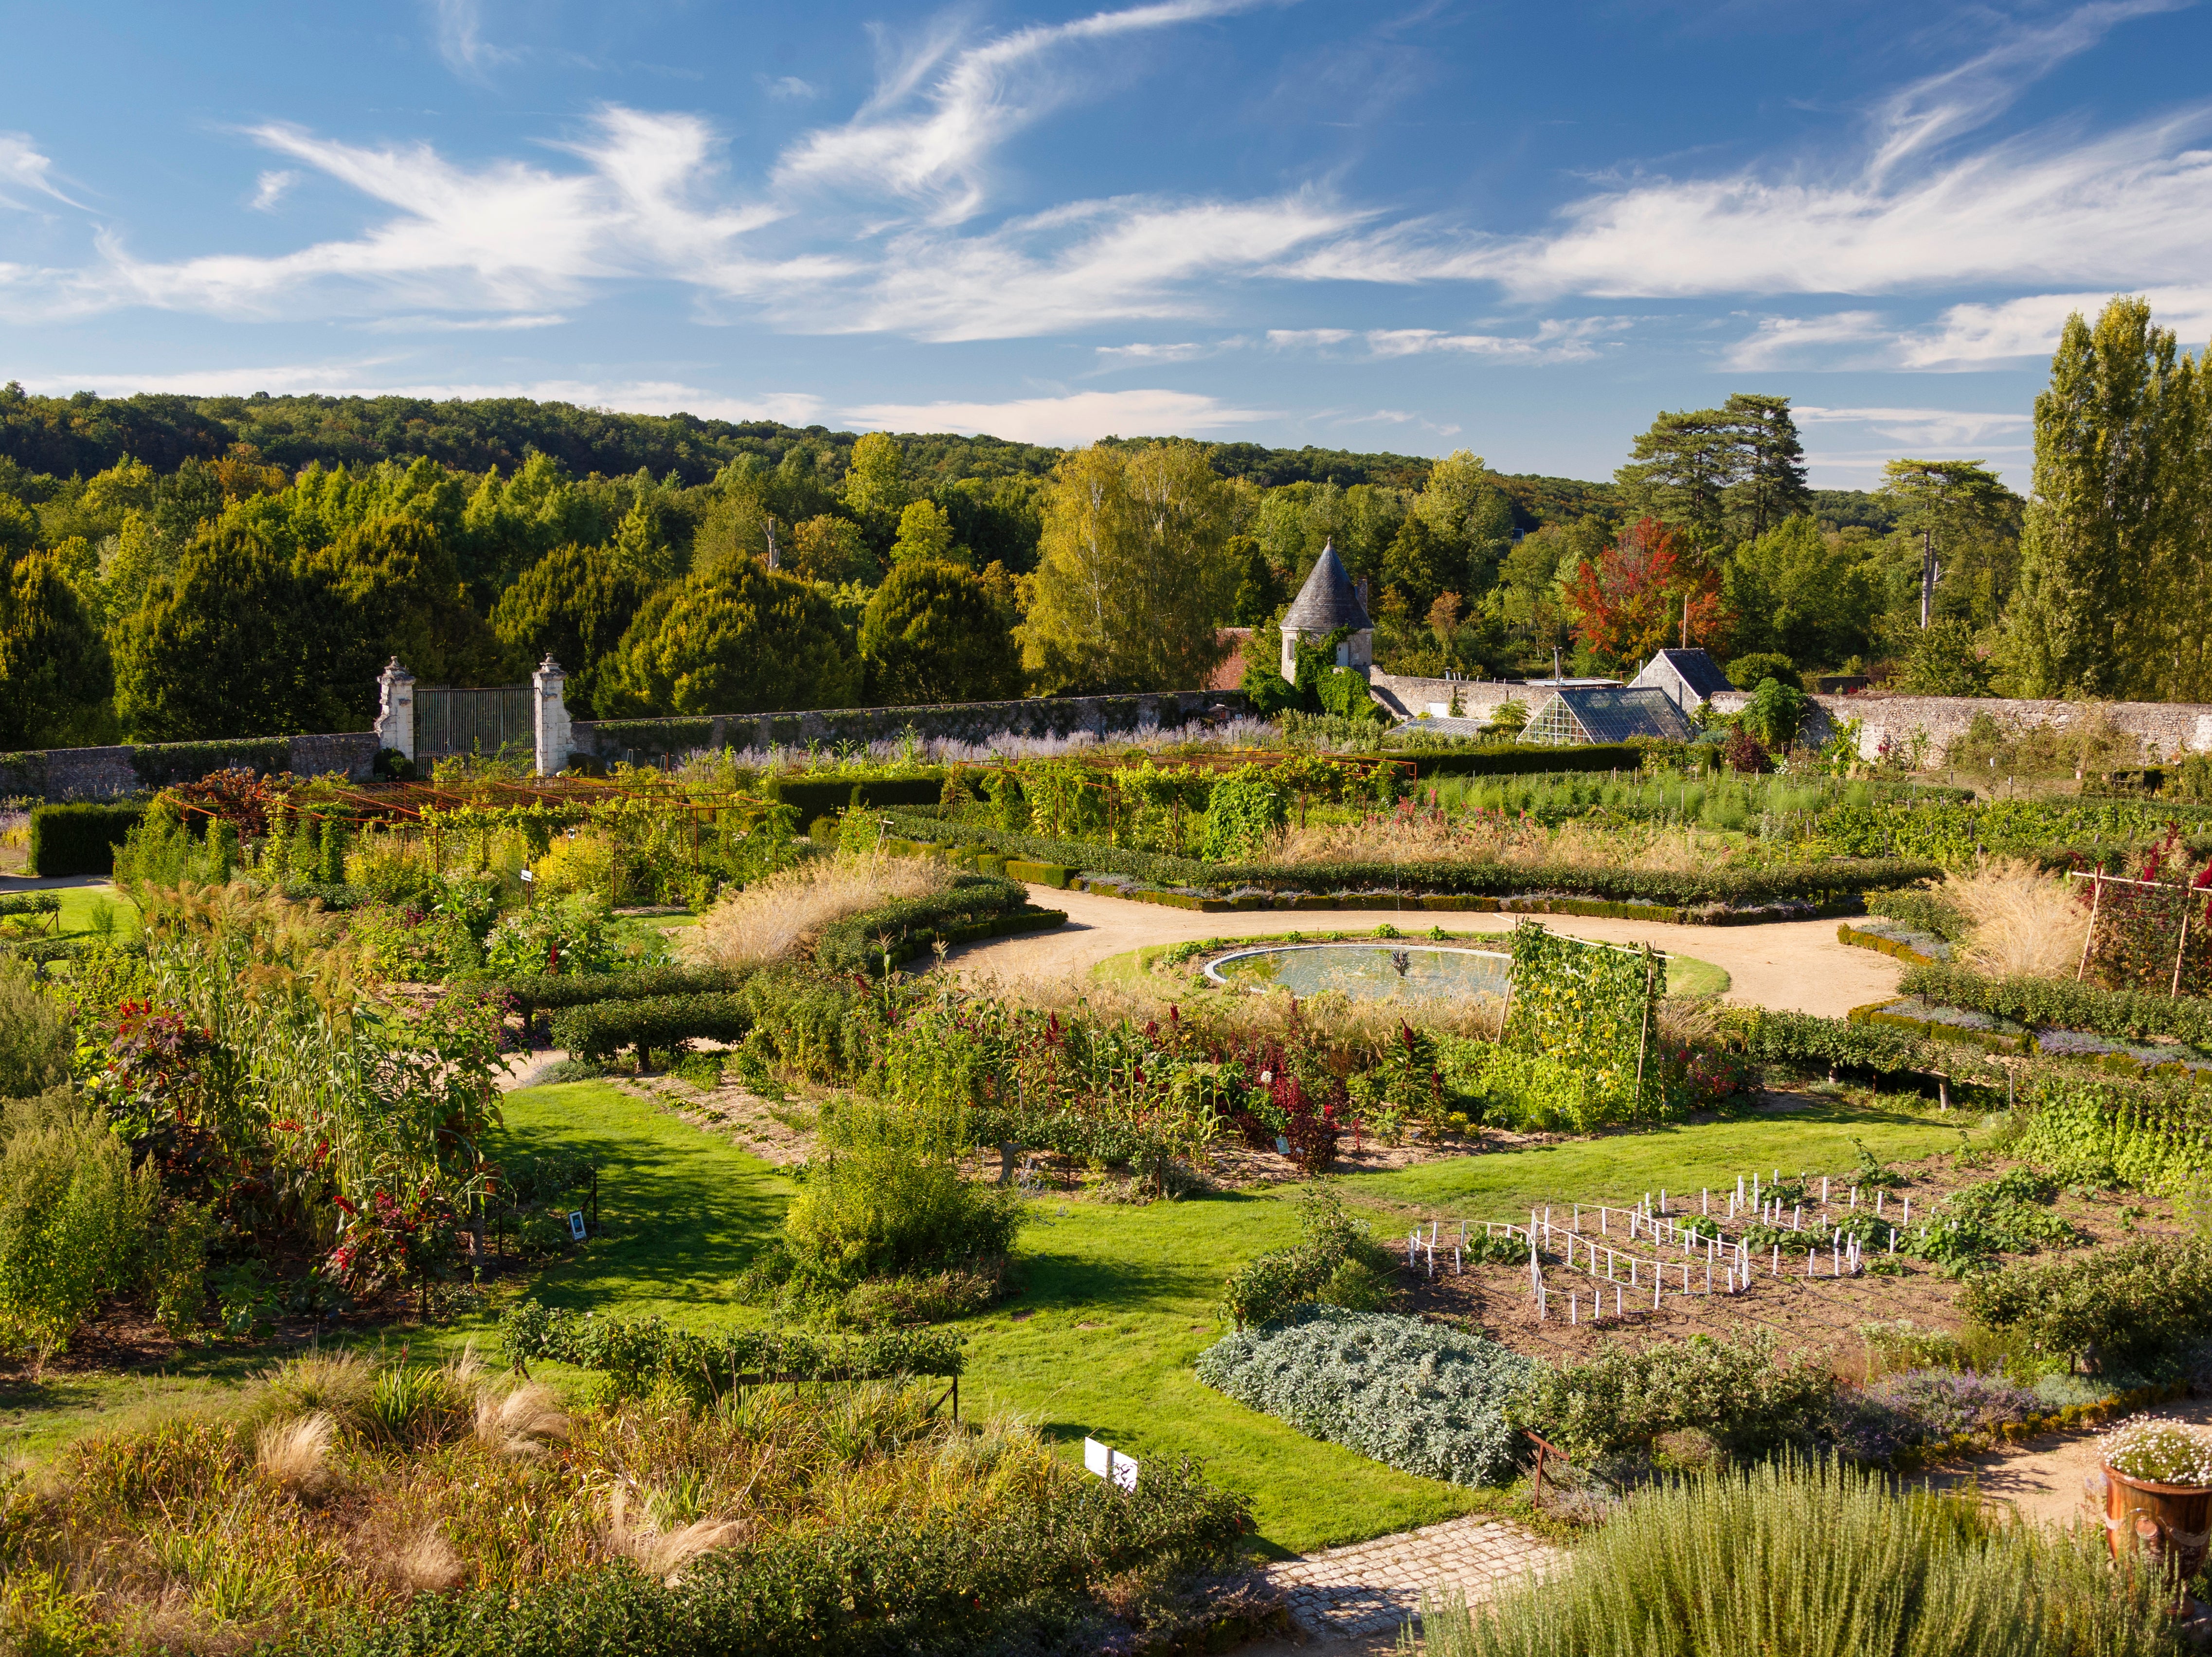 With a chateau no longer there, Valmer is all about its garden and wine